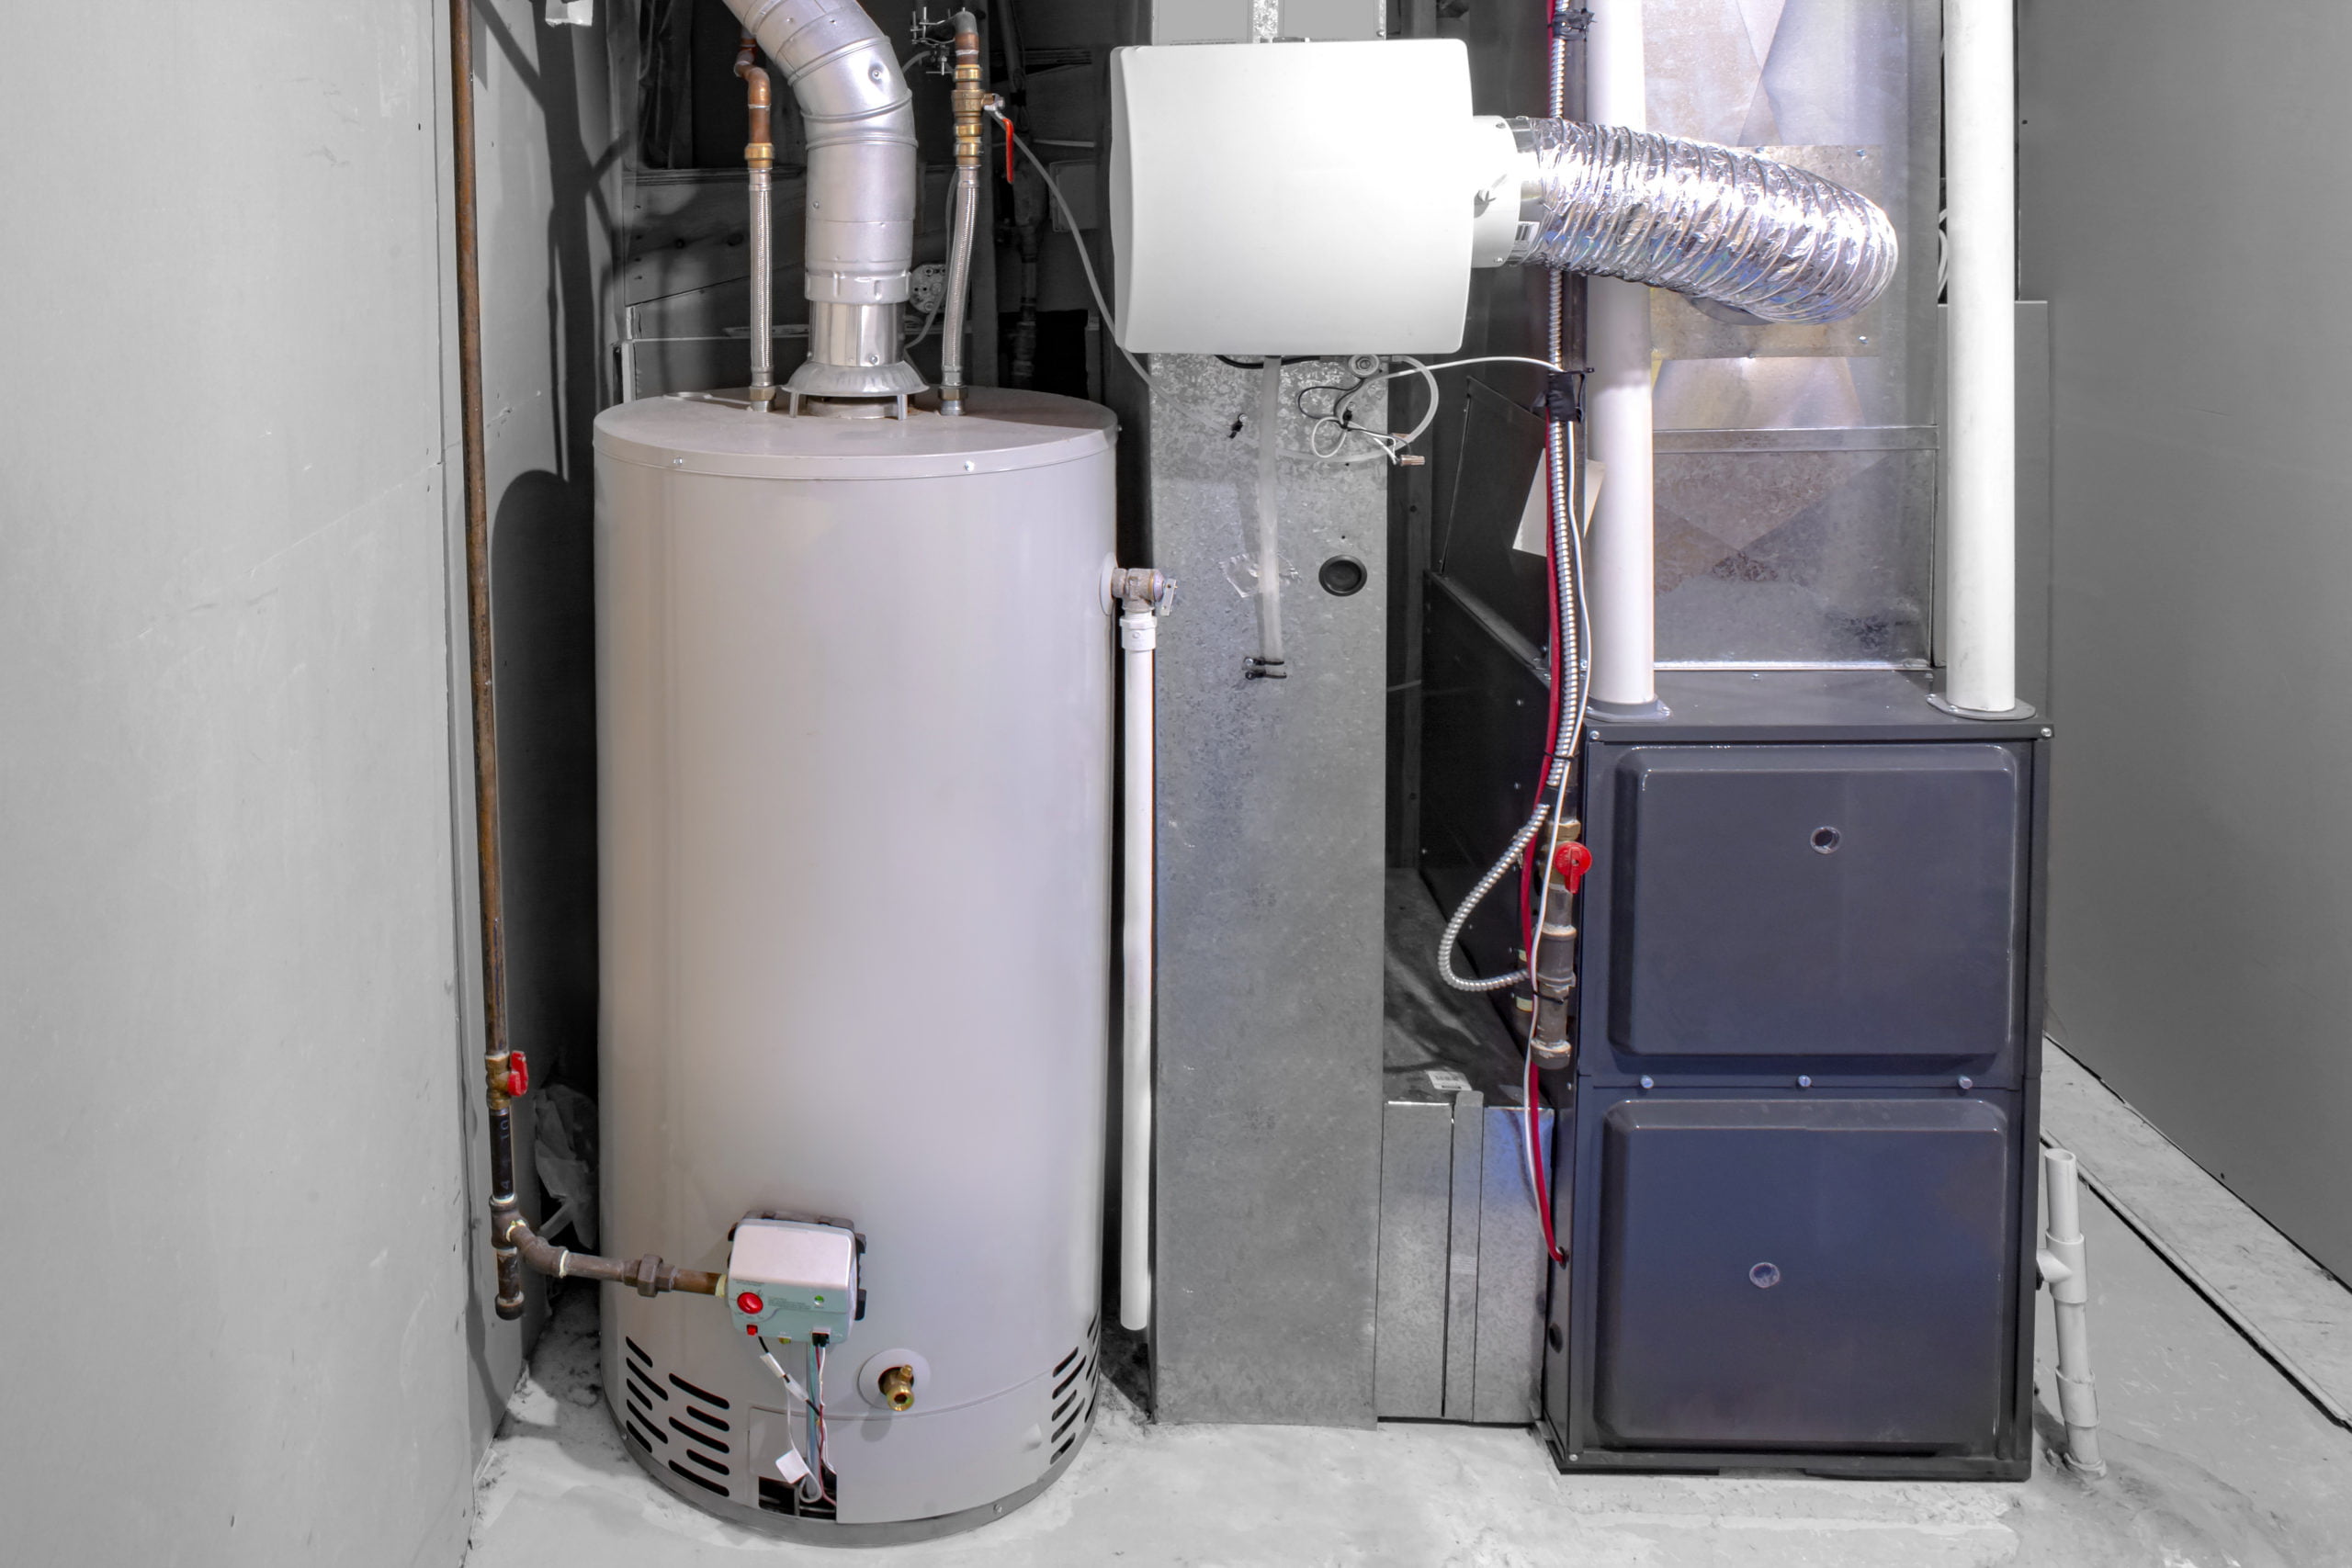 Benefits of Hiring Professional Furnace and Boiler Repair Services